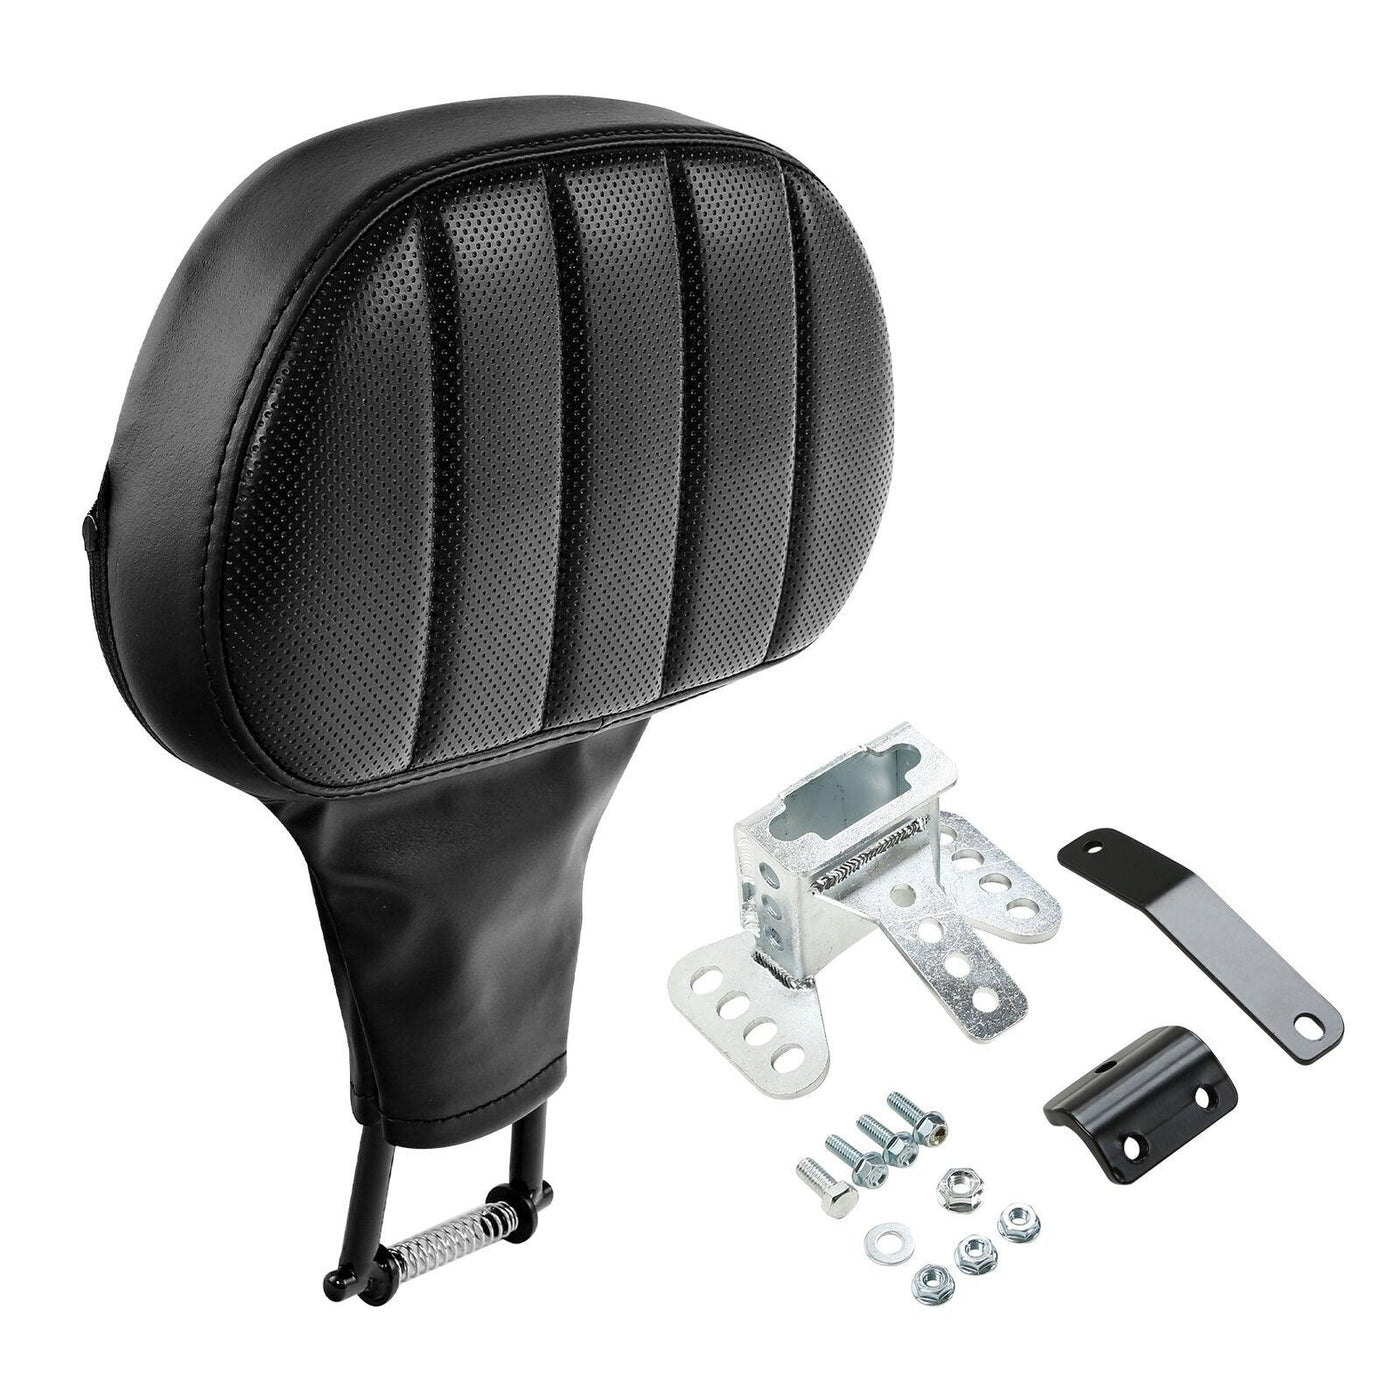 Quick Release Plug-in Driver Backrest Pad Fits For Harley Touring Glide 2009-22 - Moto Life Products